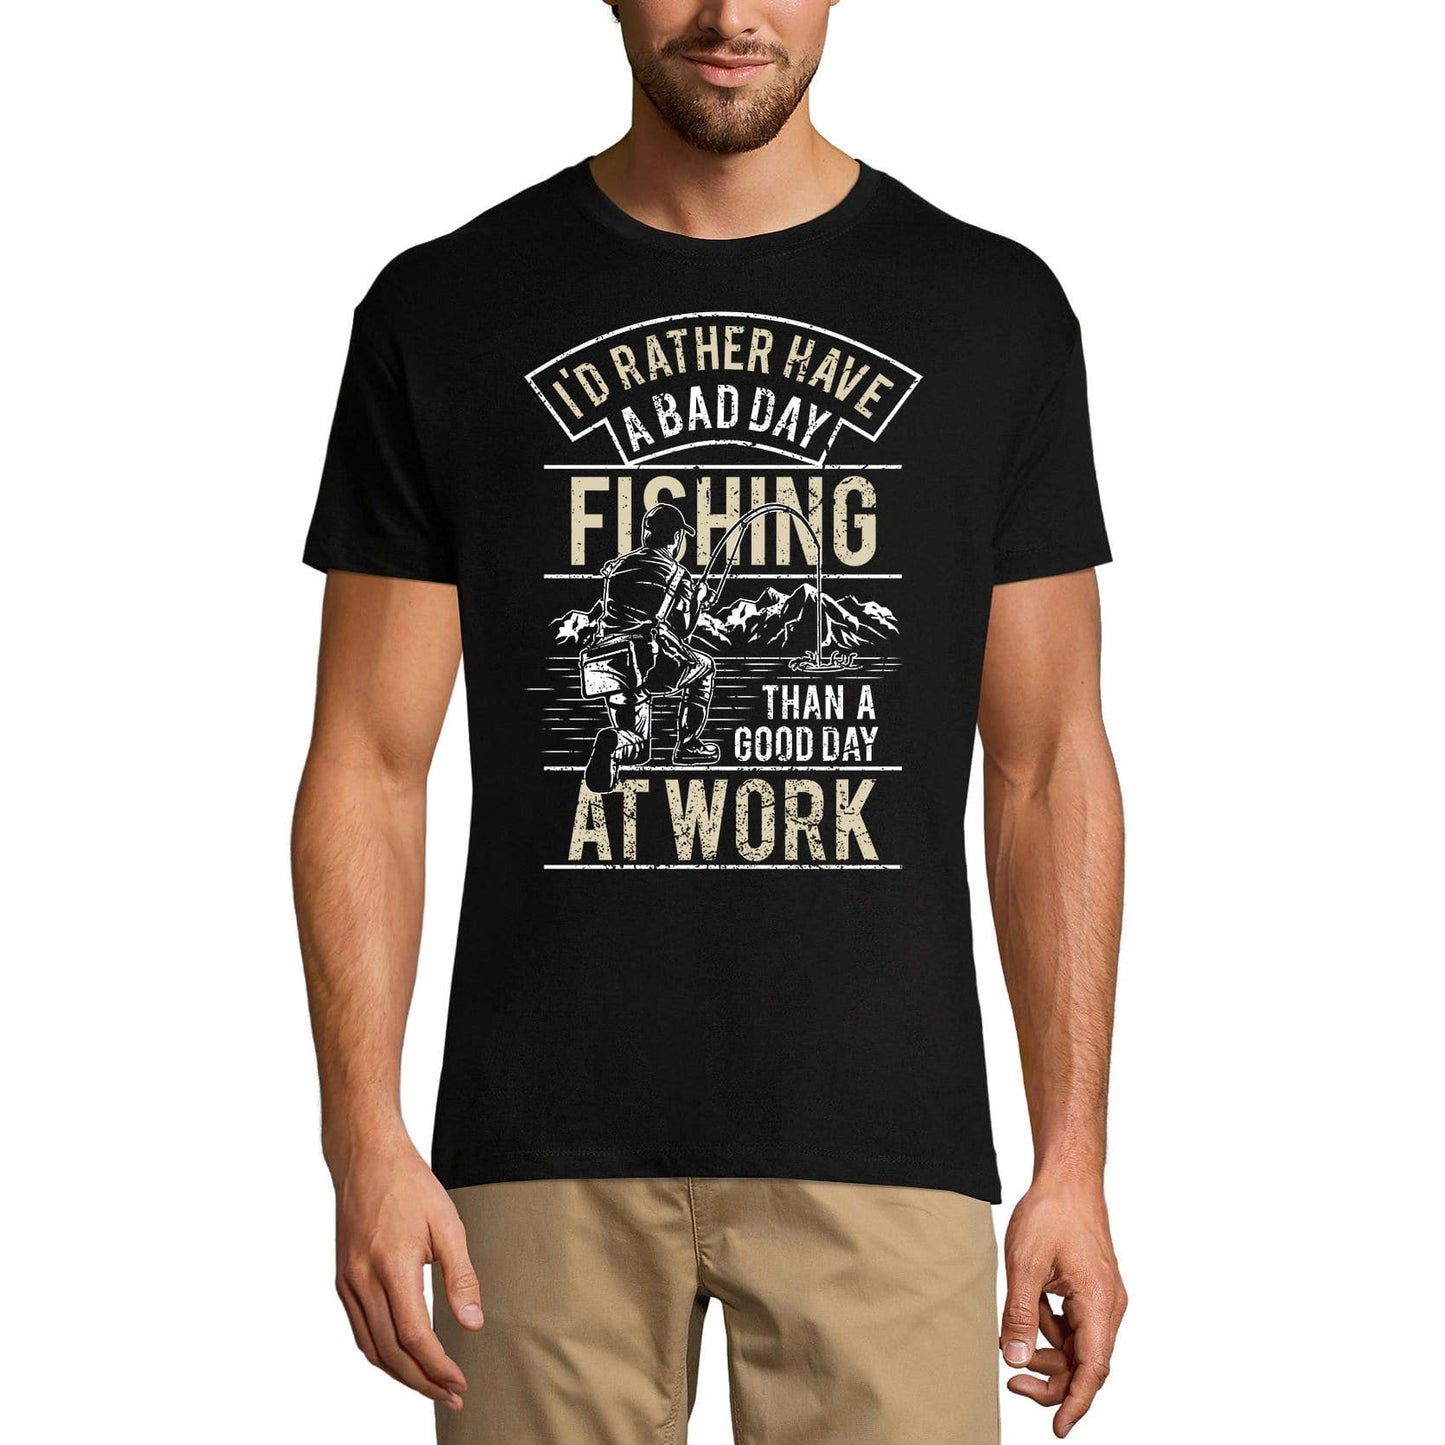 ULTRABASIC Men's T-Shirt I'd Rather Have a Bad Day at Fishing Than a Good Day at Work - Funny Fisherman Tee Shirt